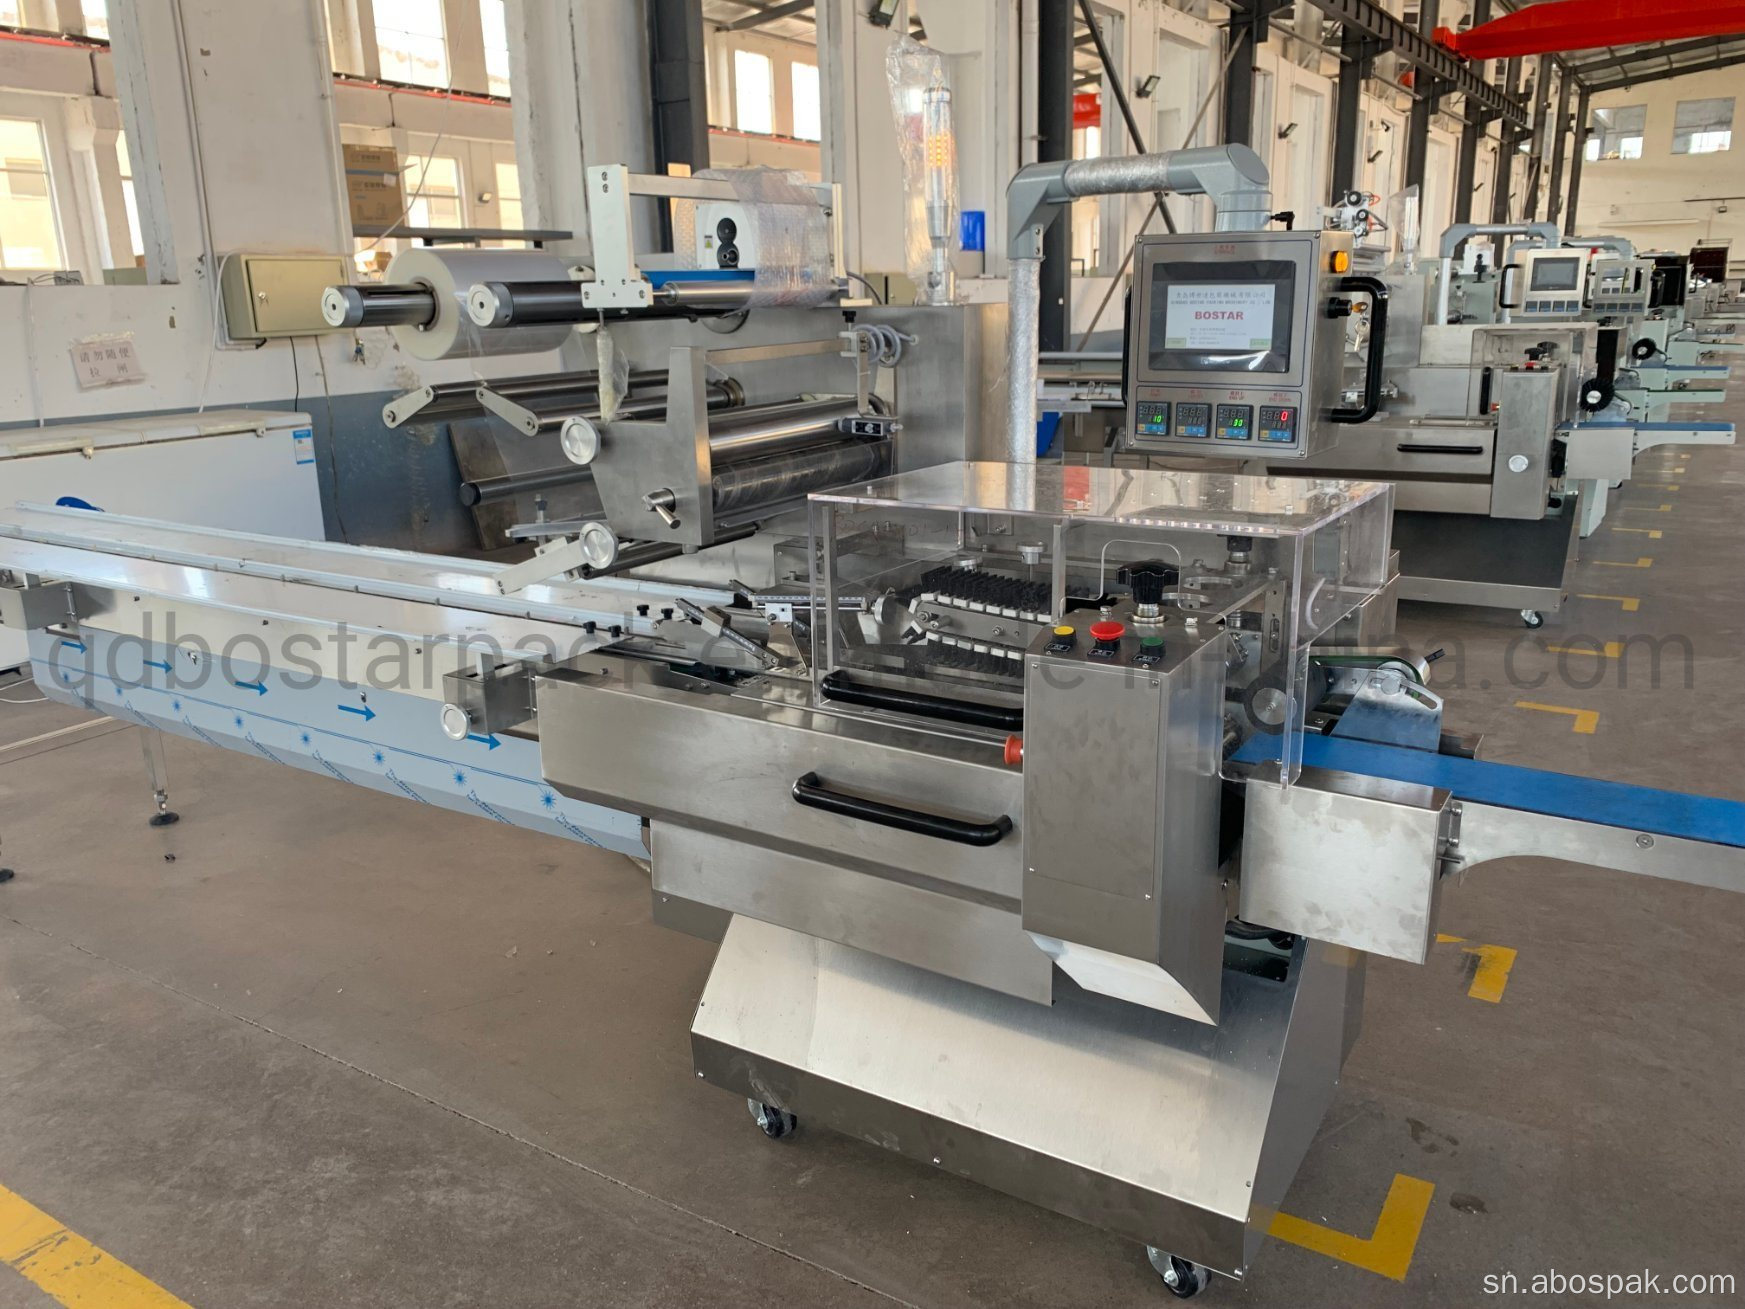 Automated bakery rolls pillow packing equipment